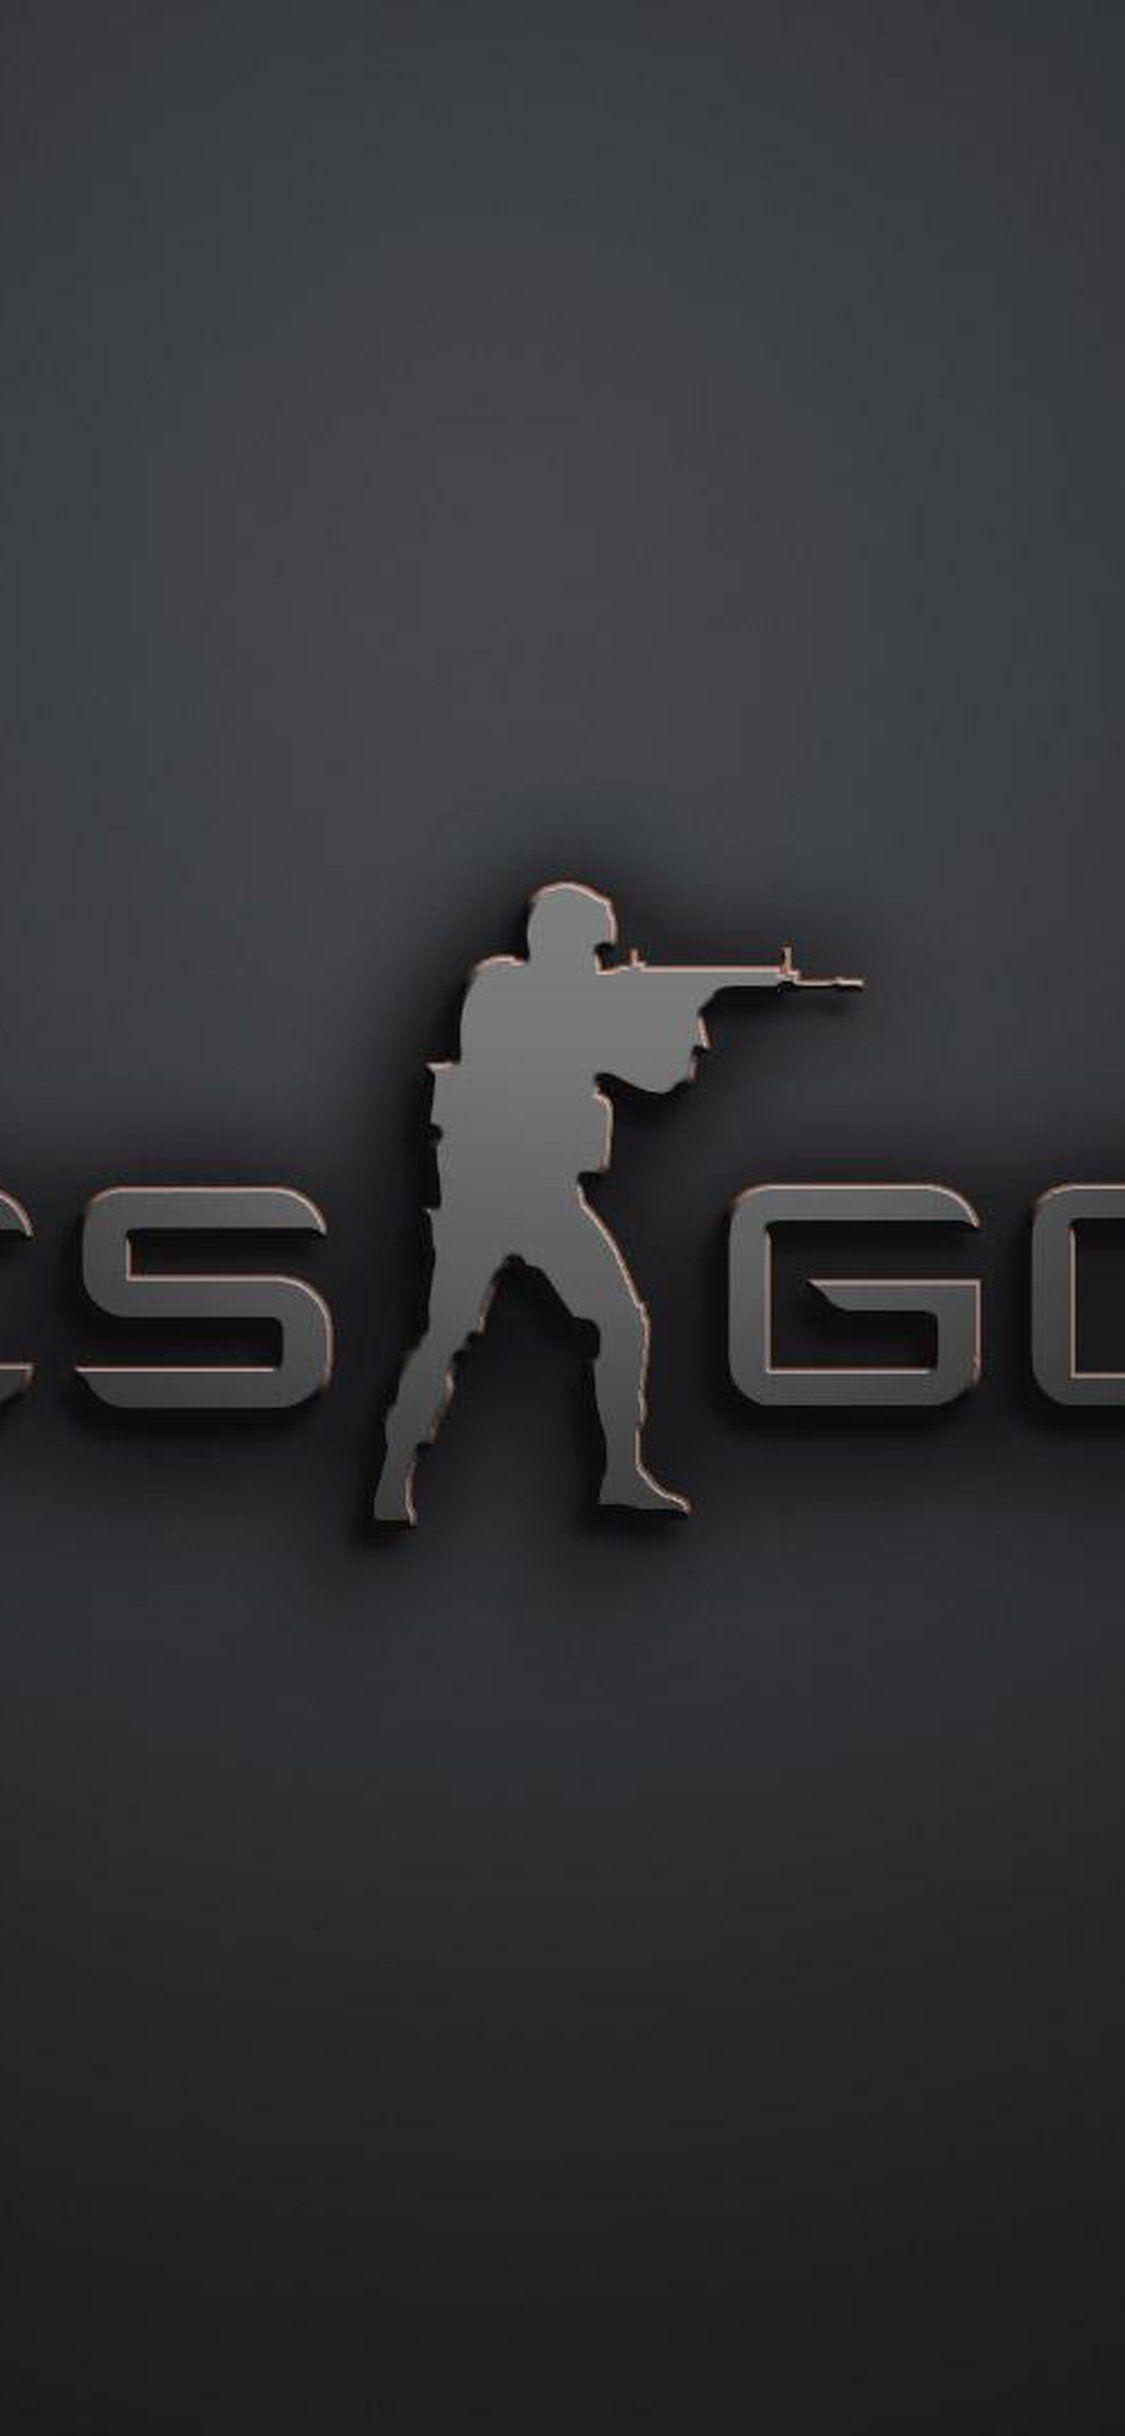 1280x2120 Cs Go 4k iPhone 6+ HD 4k Wallpapers, Images, Backgrounds